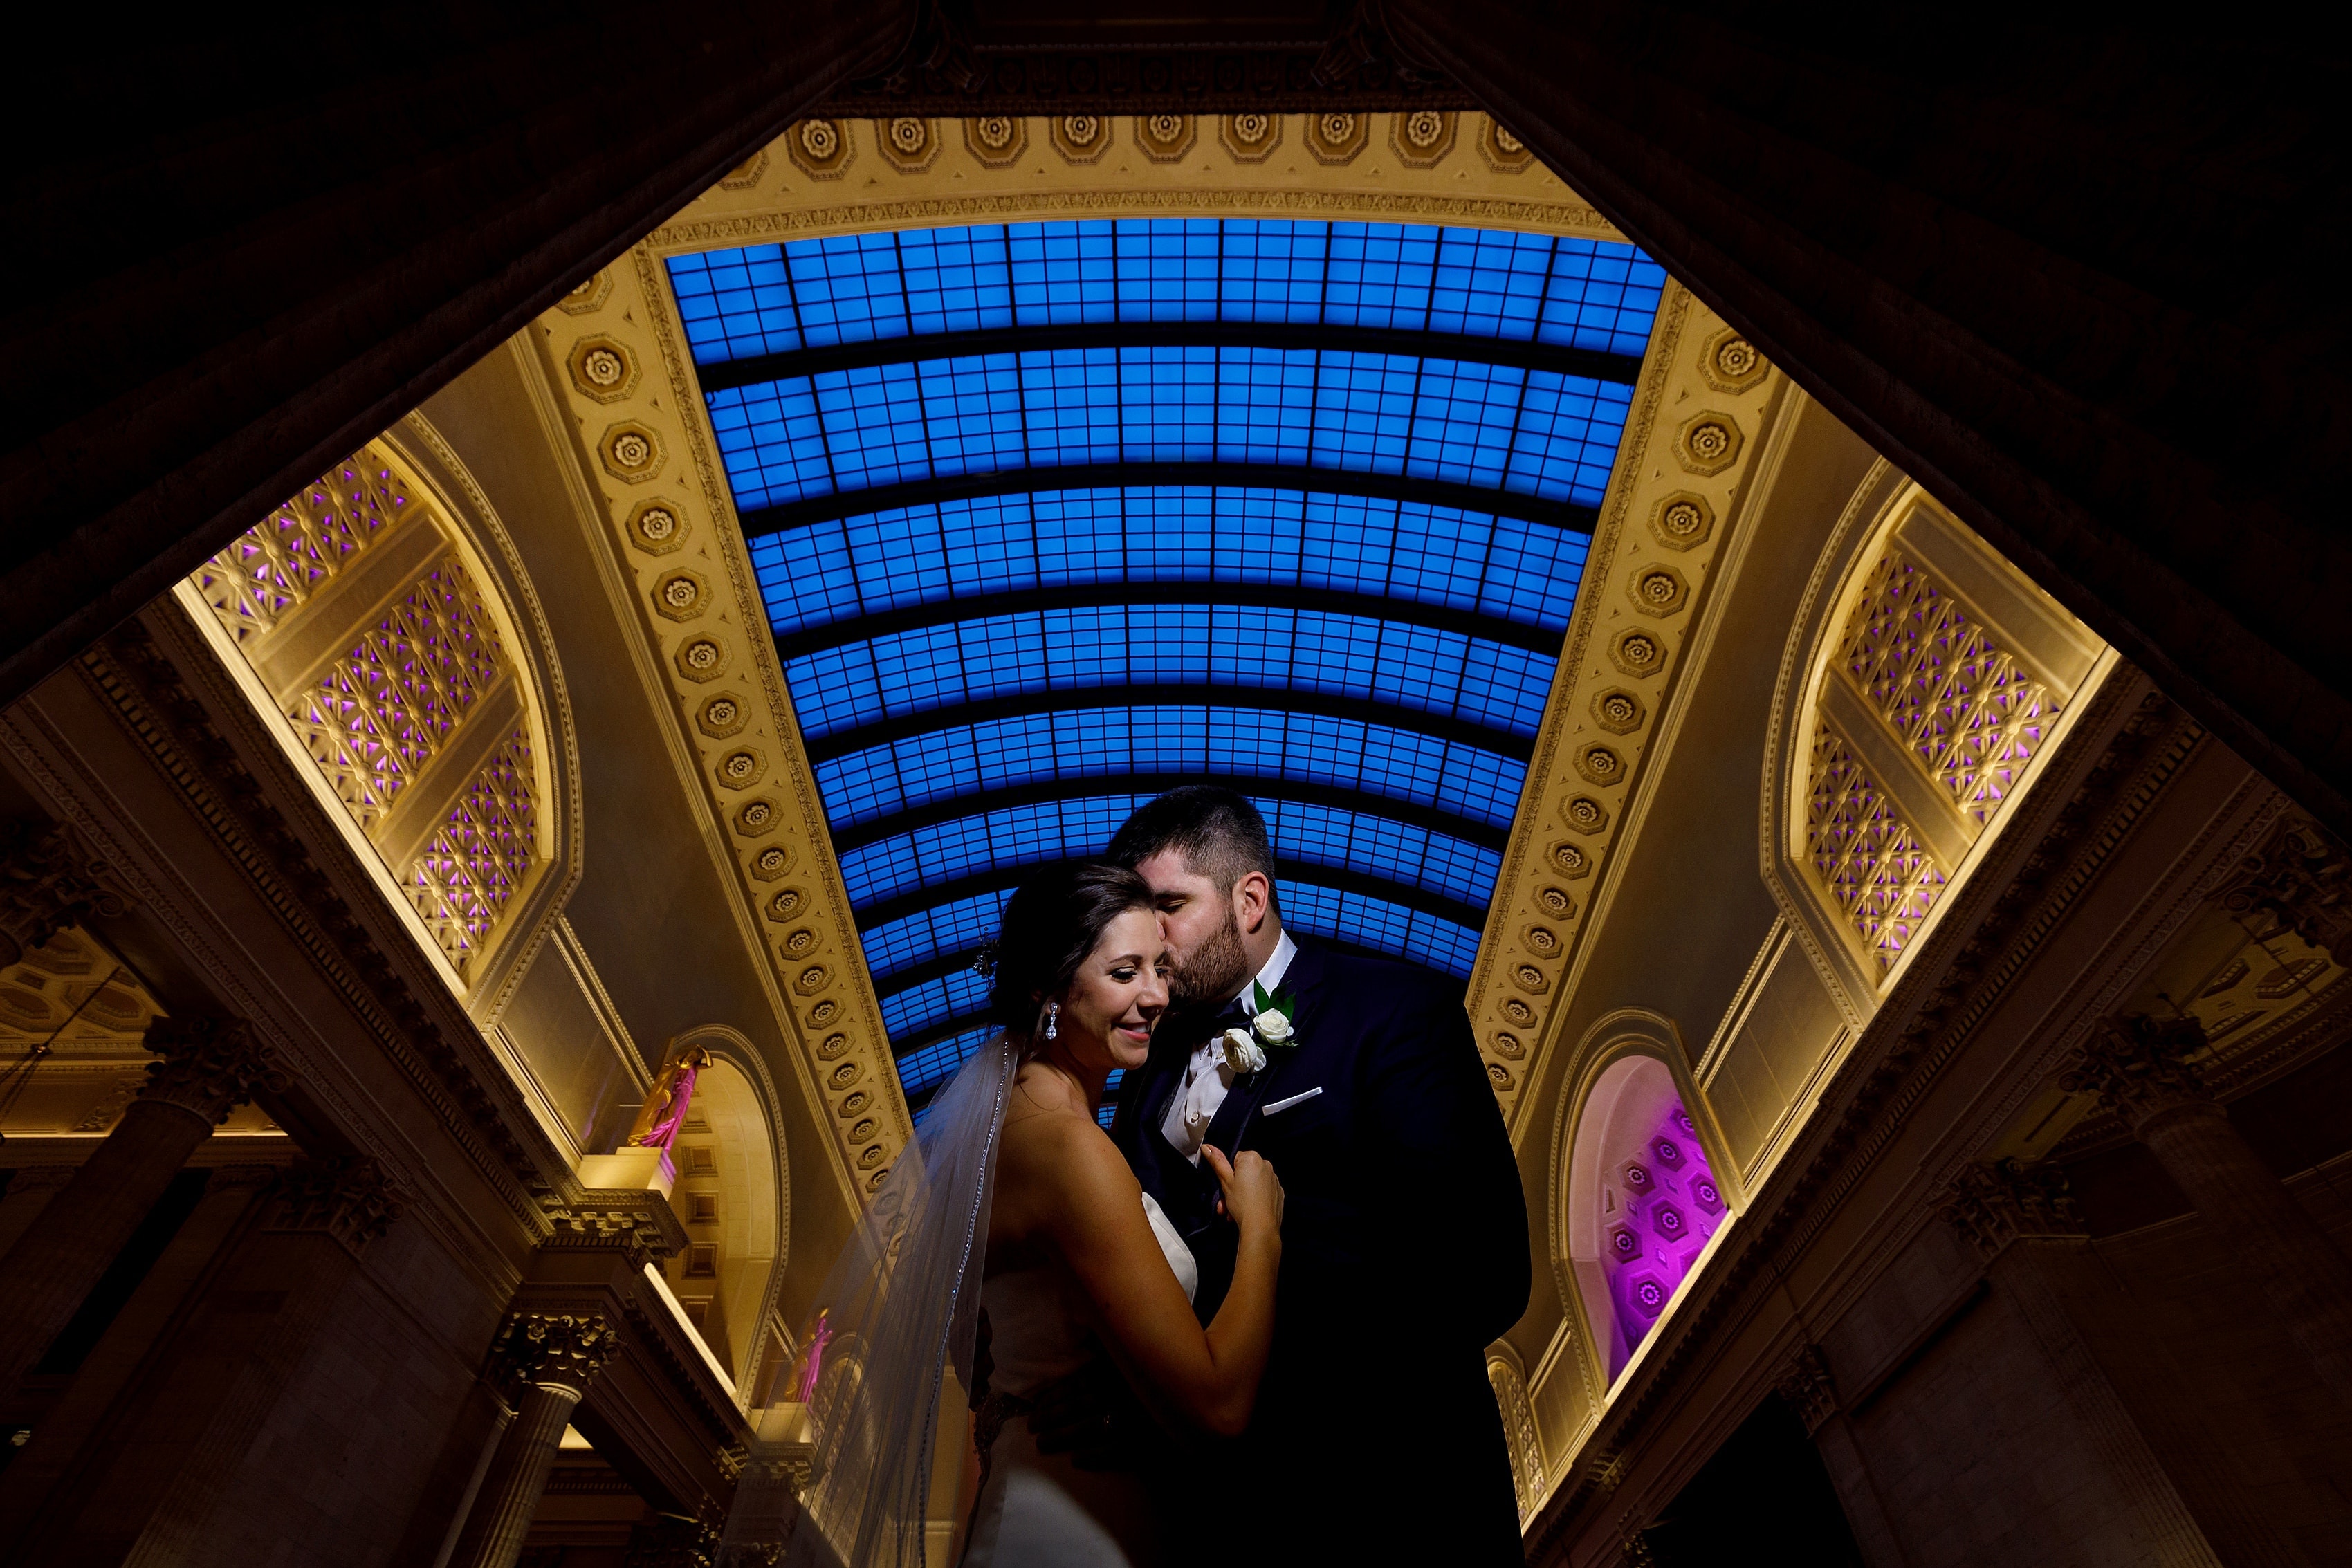 bride and groom pose for wedding photos inside Union Station during wedding in downtown Chicago with glass ceiling featured prominently 